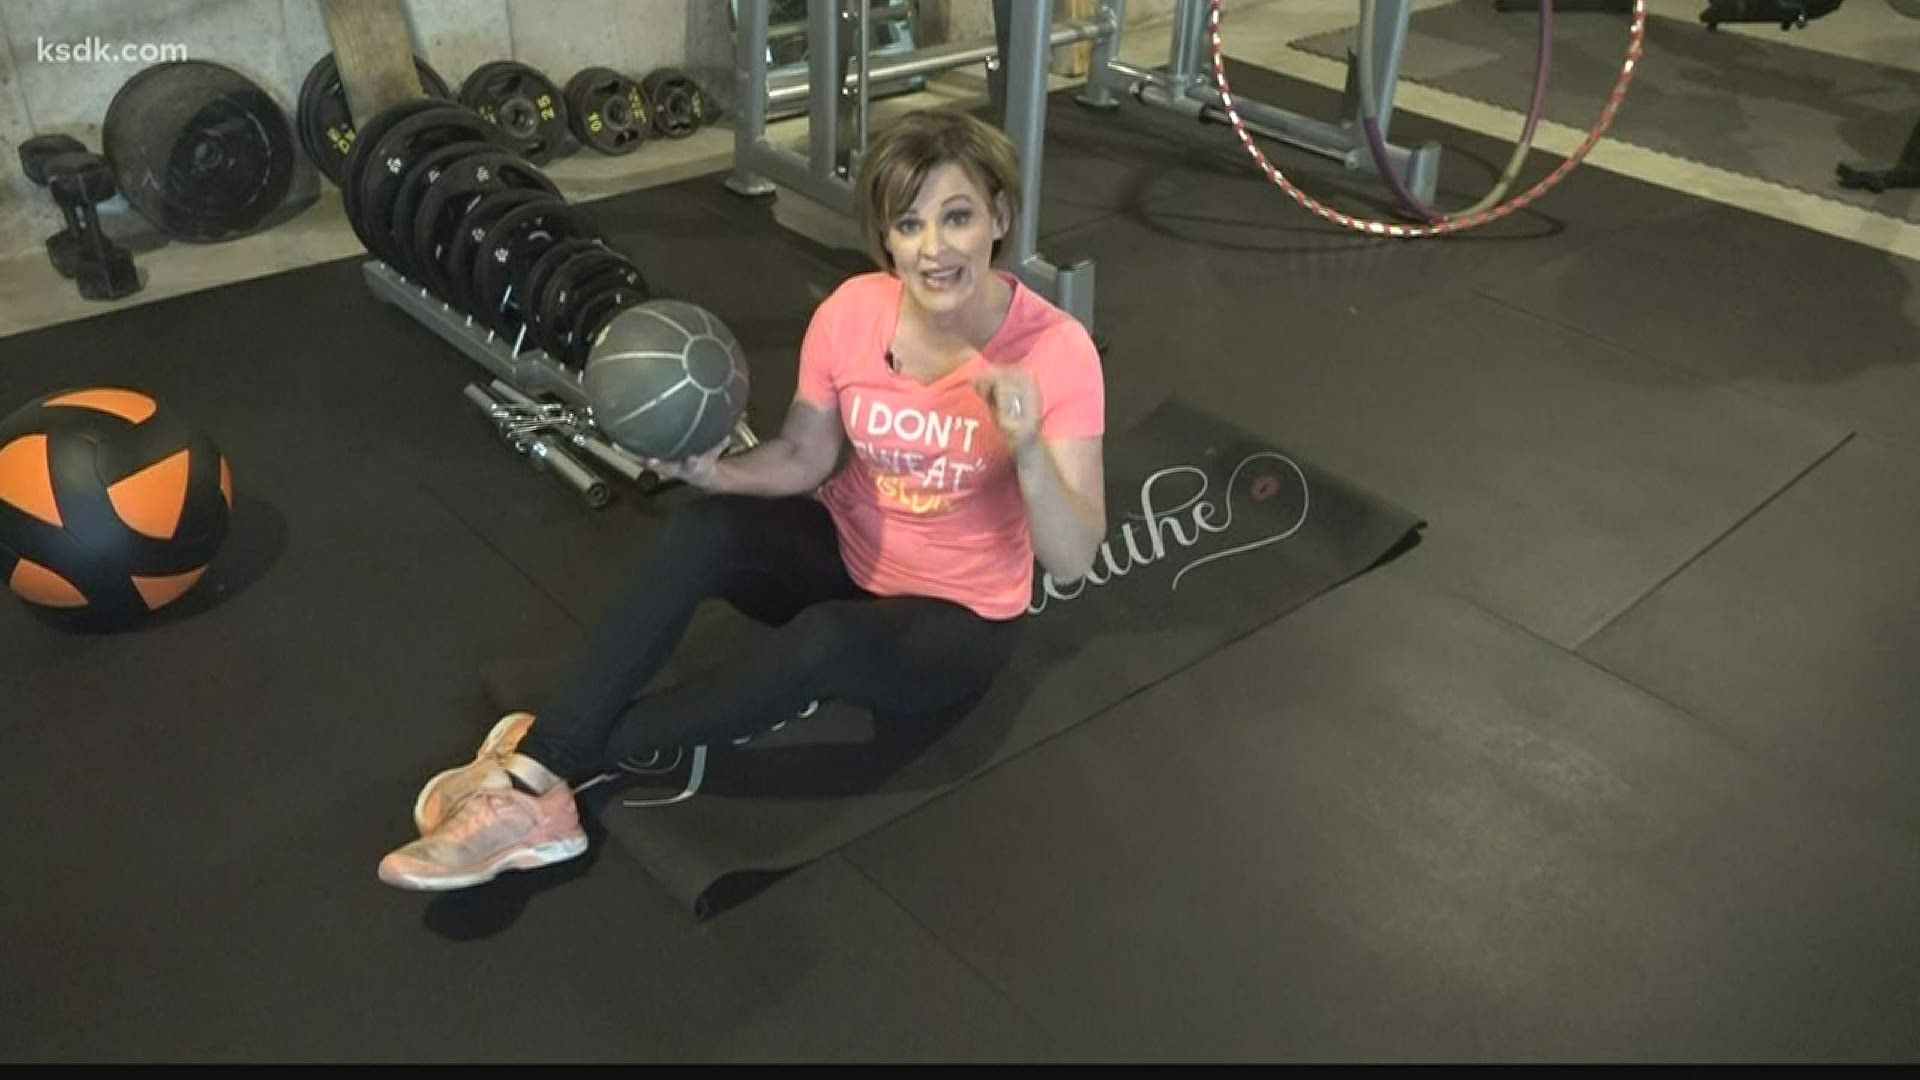 5 On Your Side's Monica Adams gives fitness tips that anyone can do at home.